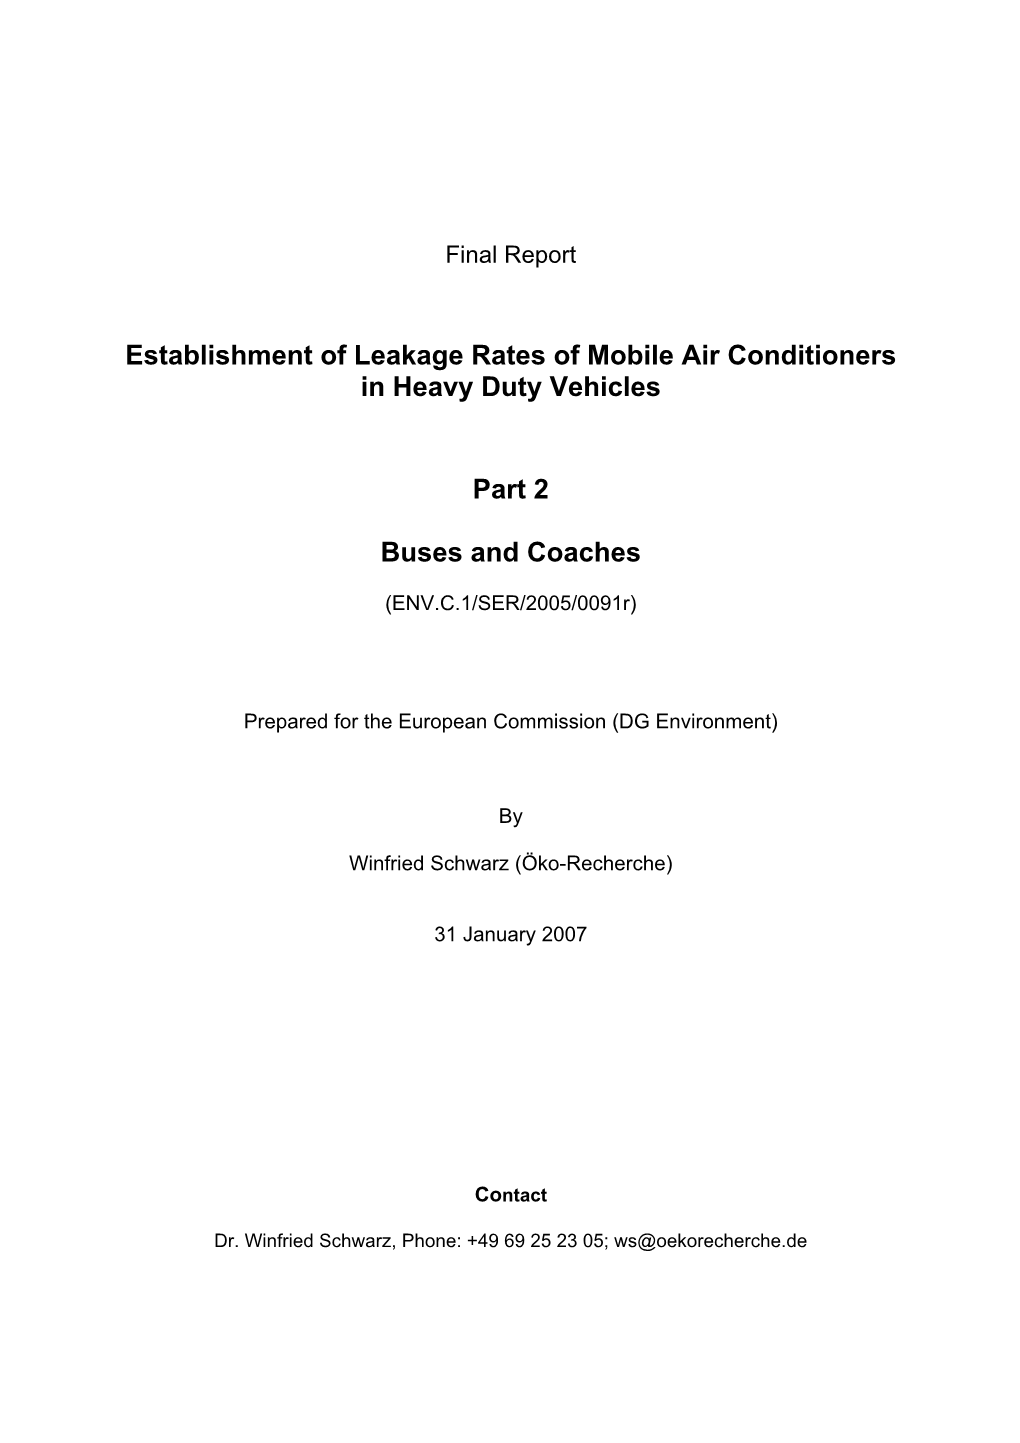 Establishment of Leakage Rates of Mobile Air Conditioners in Heavy Duty Vehicles